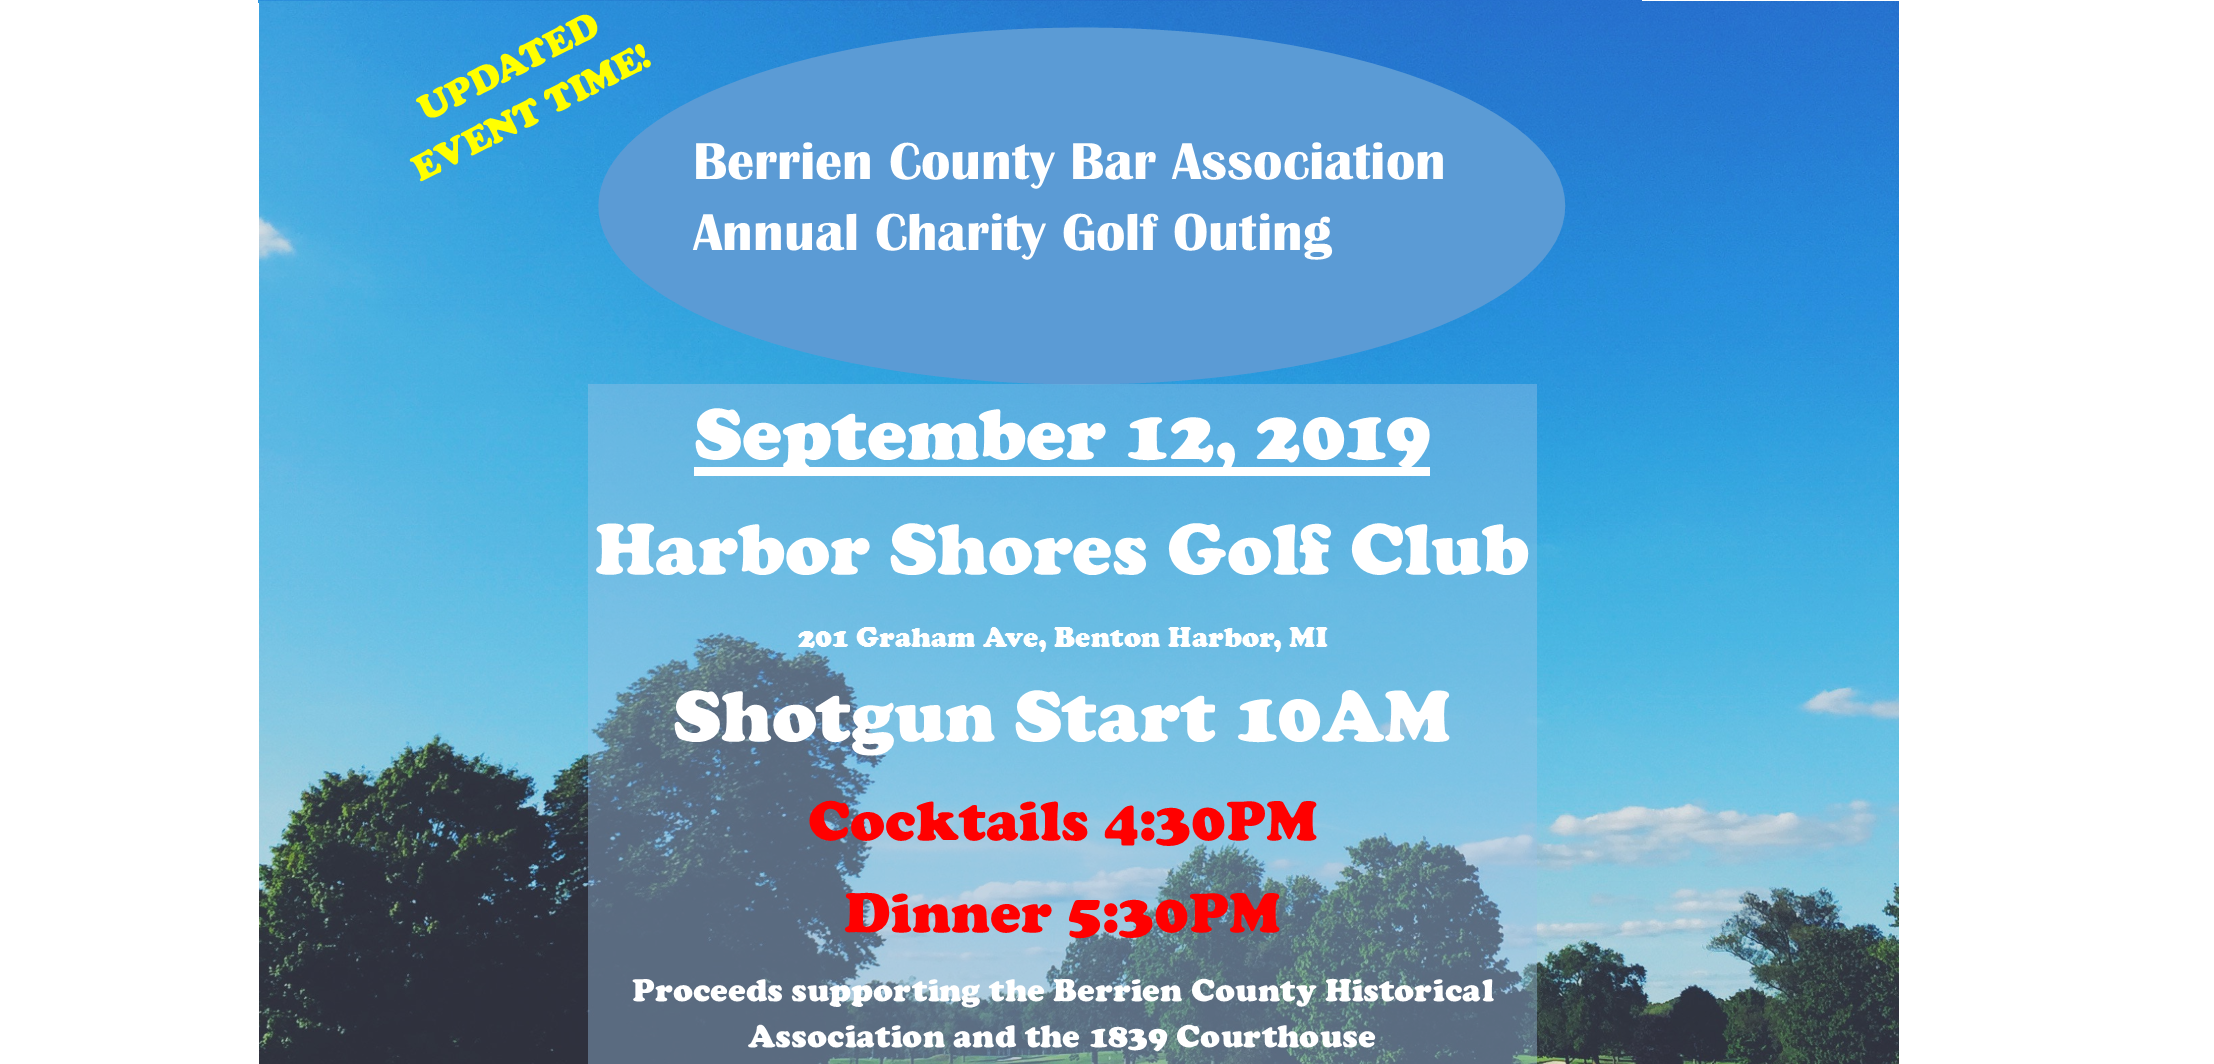 2019 BCBA Annual Charity Golf Outing